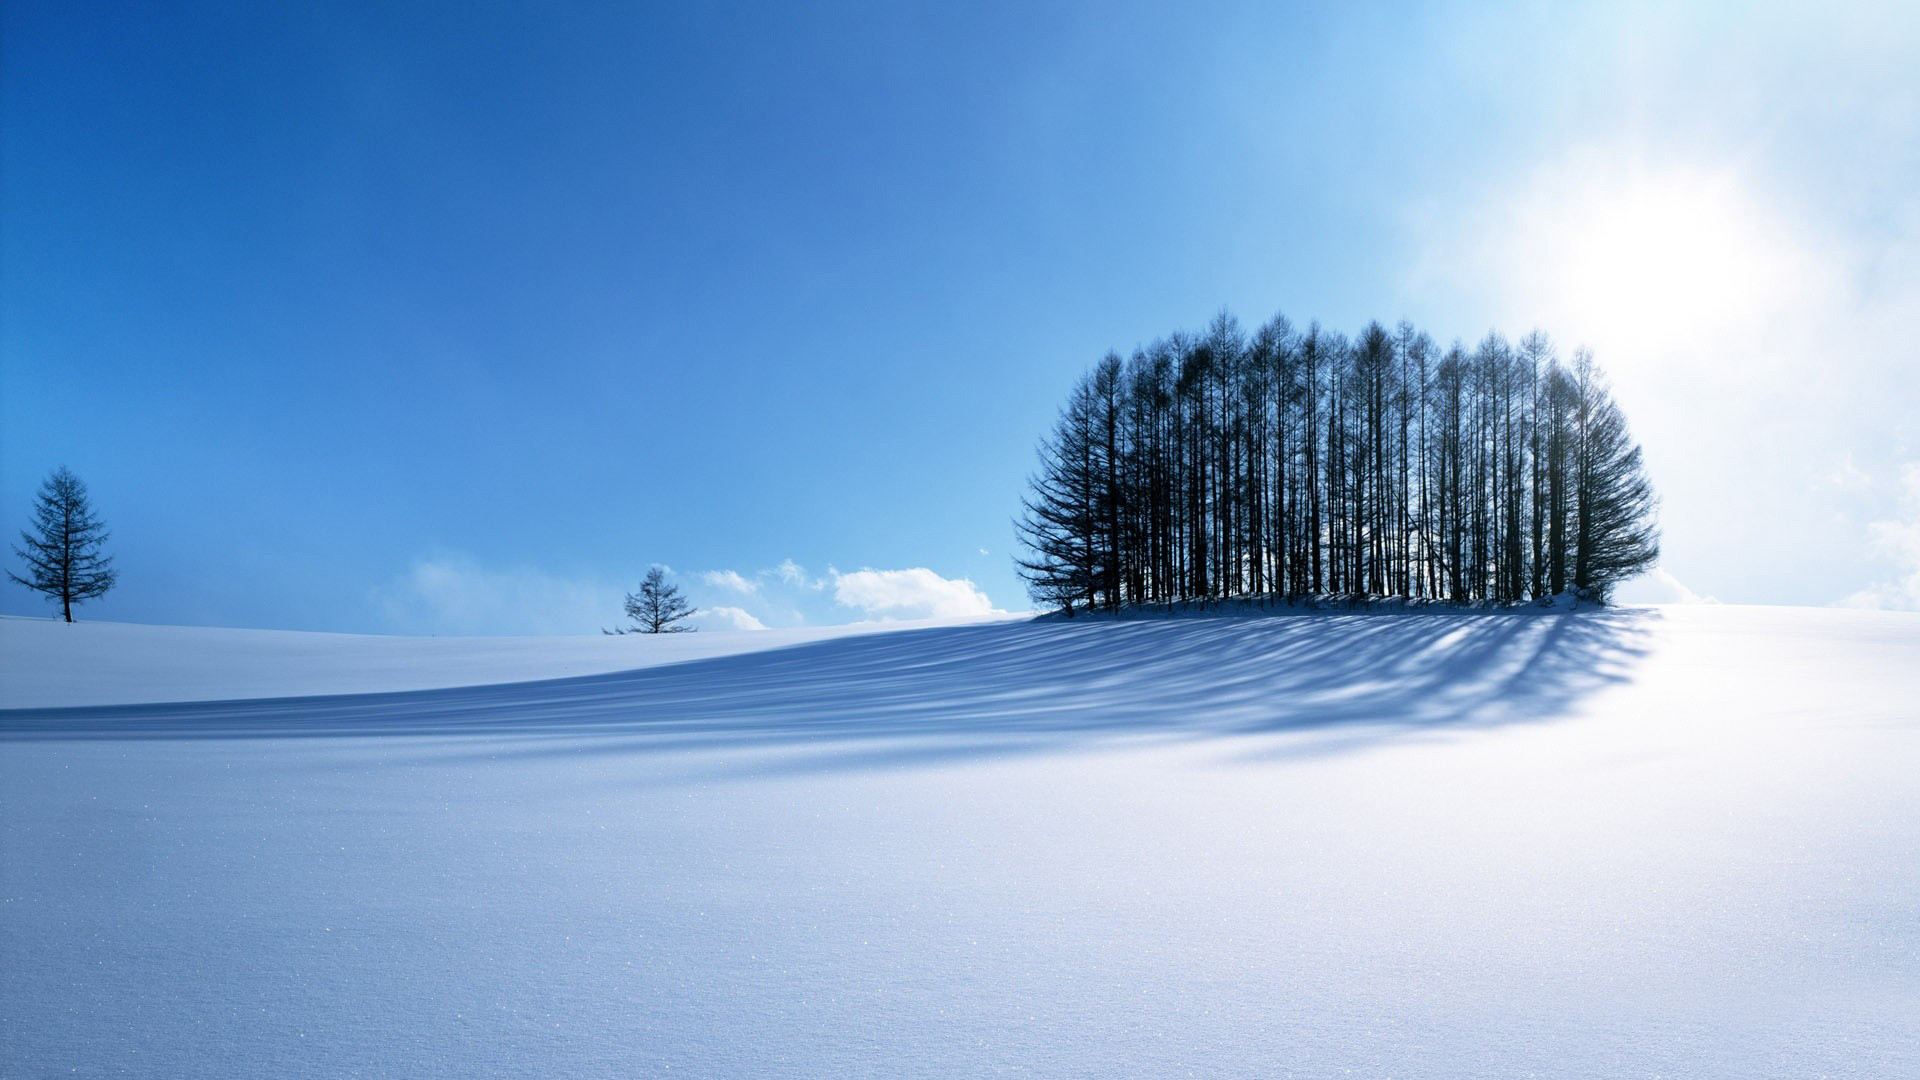 1920x1080 Winter HD Wallpaper | Background Image |  | ID:598278 - Wallpaper  Abyss